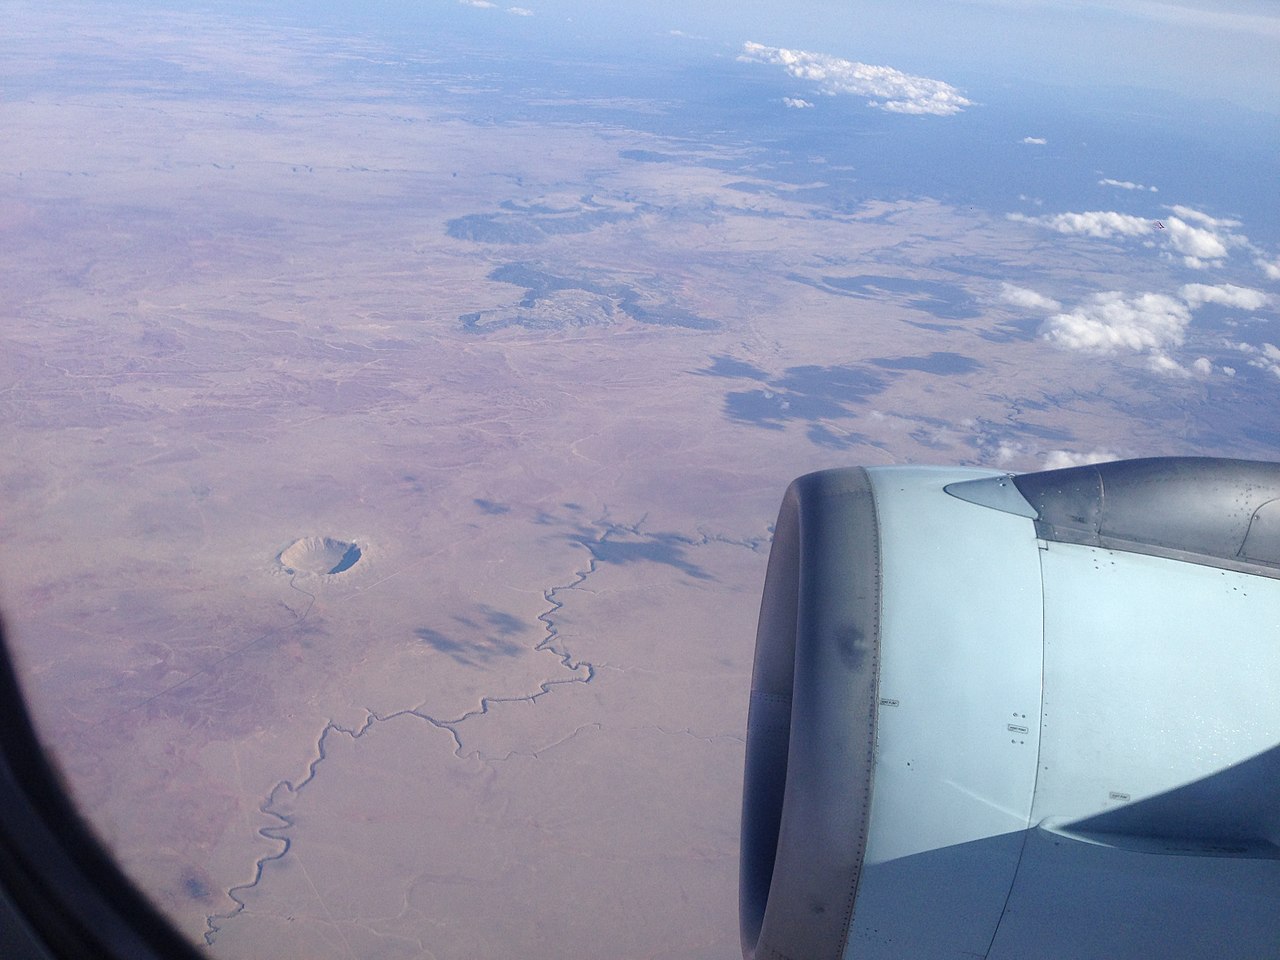 Recent History of Barringer Crater